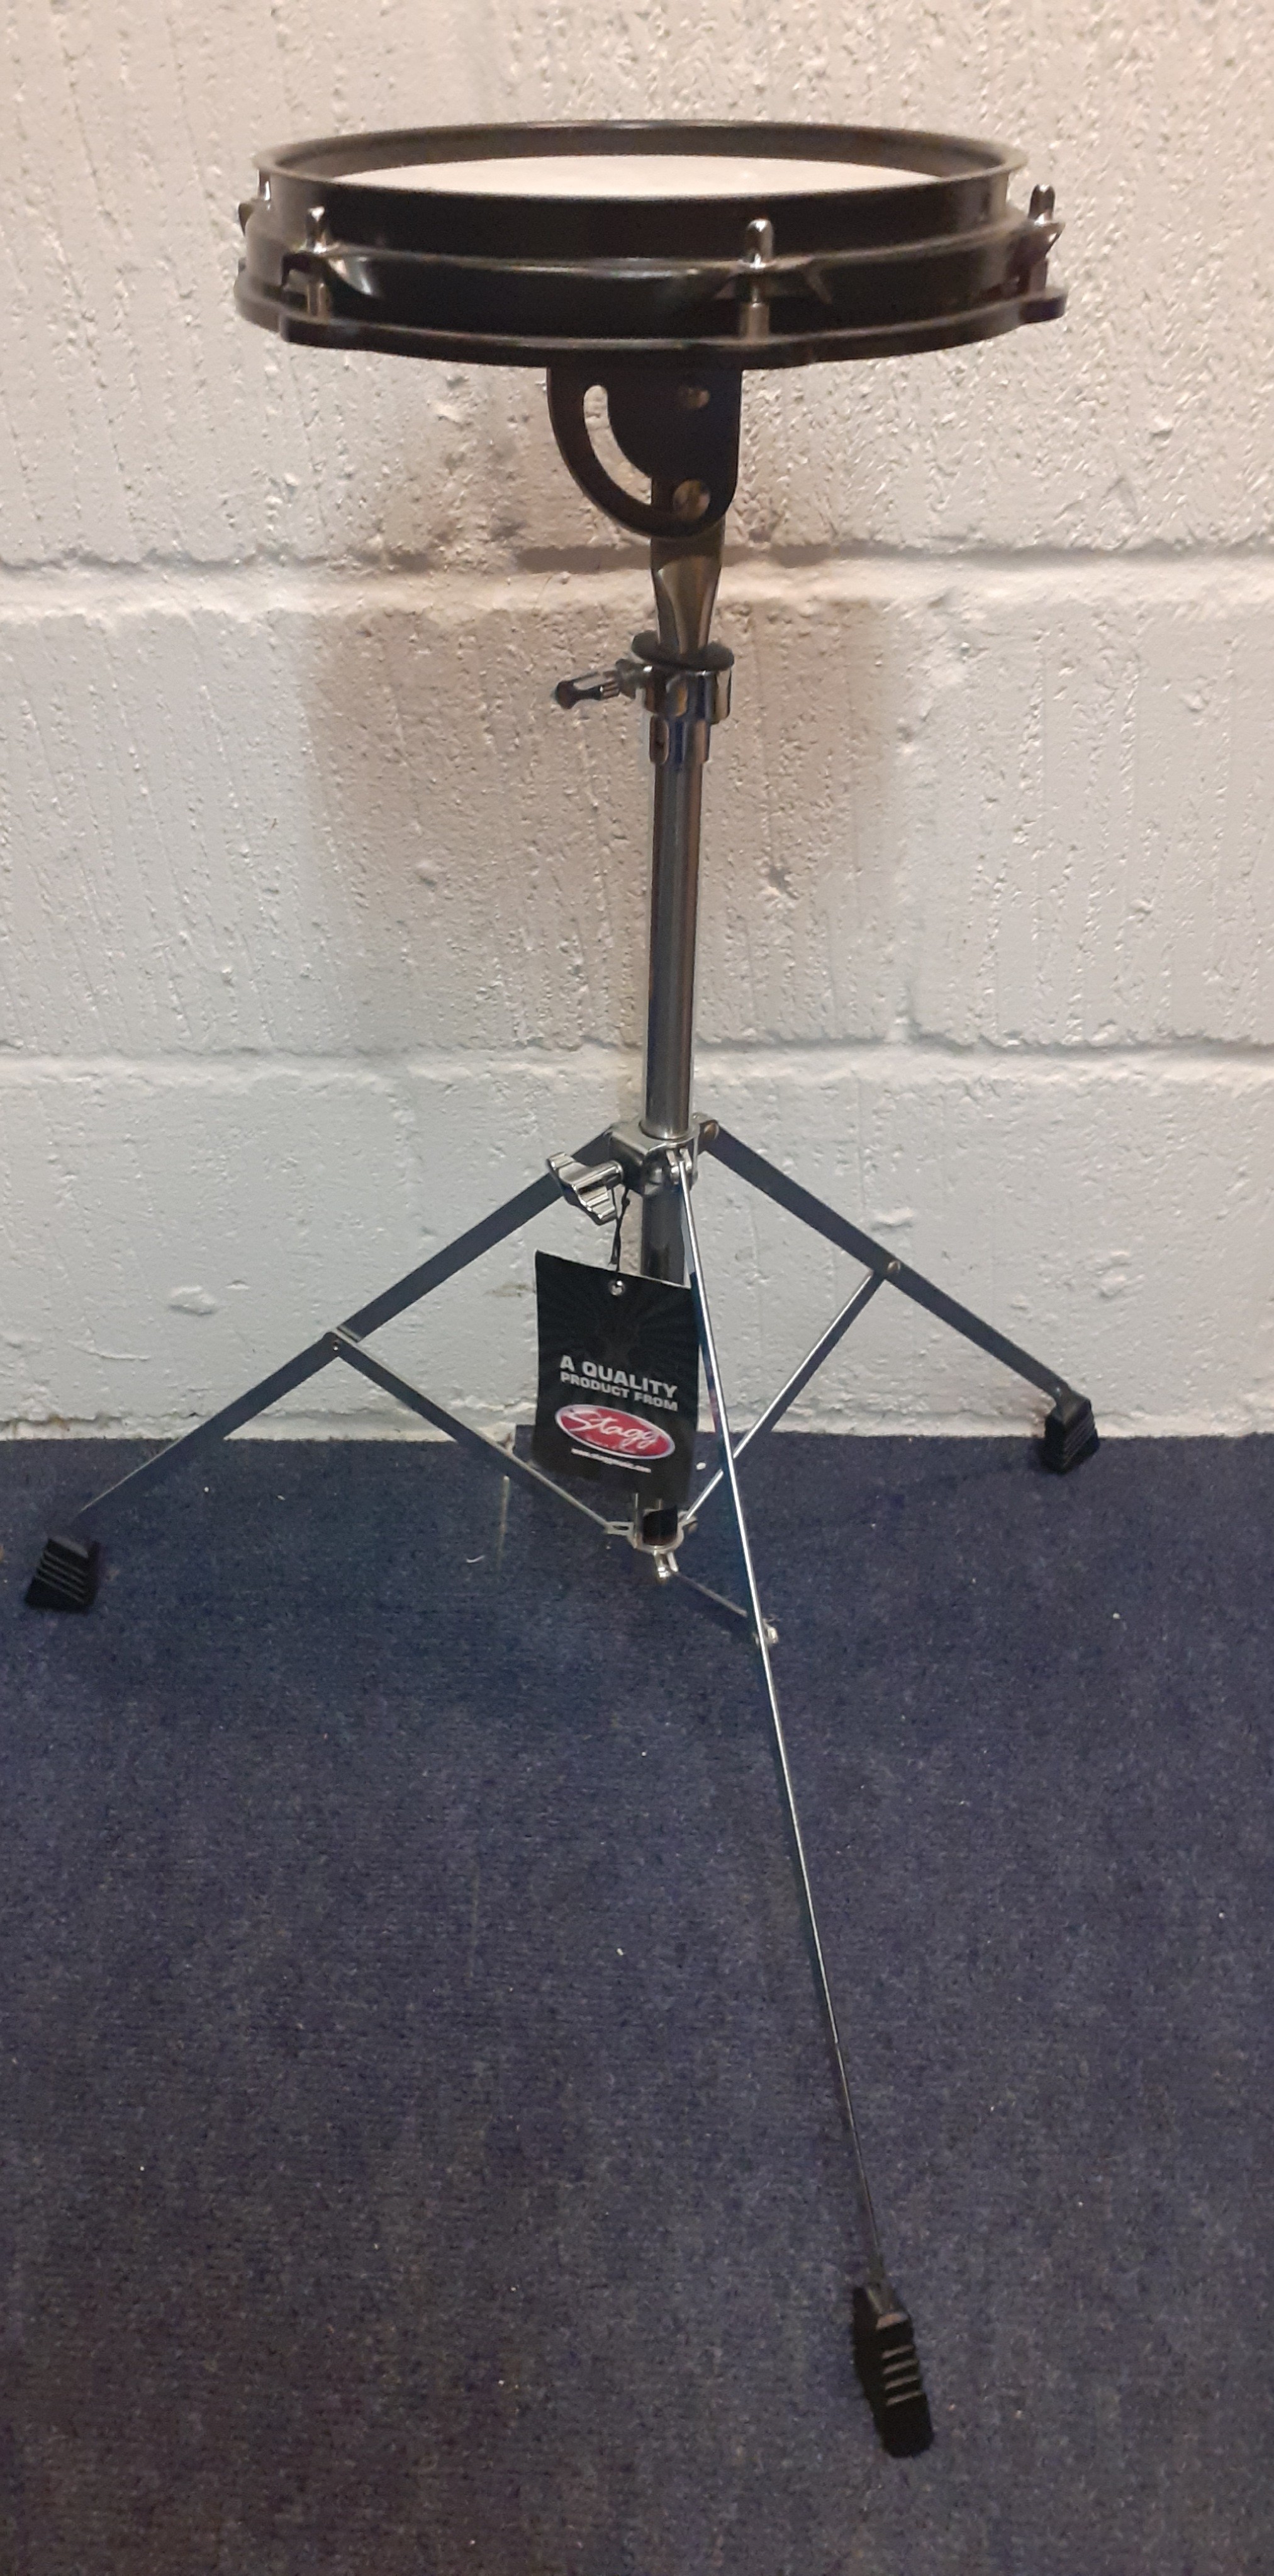 A Stagg practice/training drum on folding and adjustable stand, new with original tags. Location:RWM